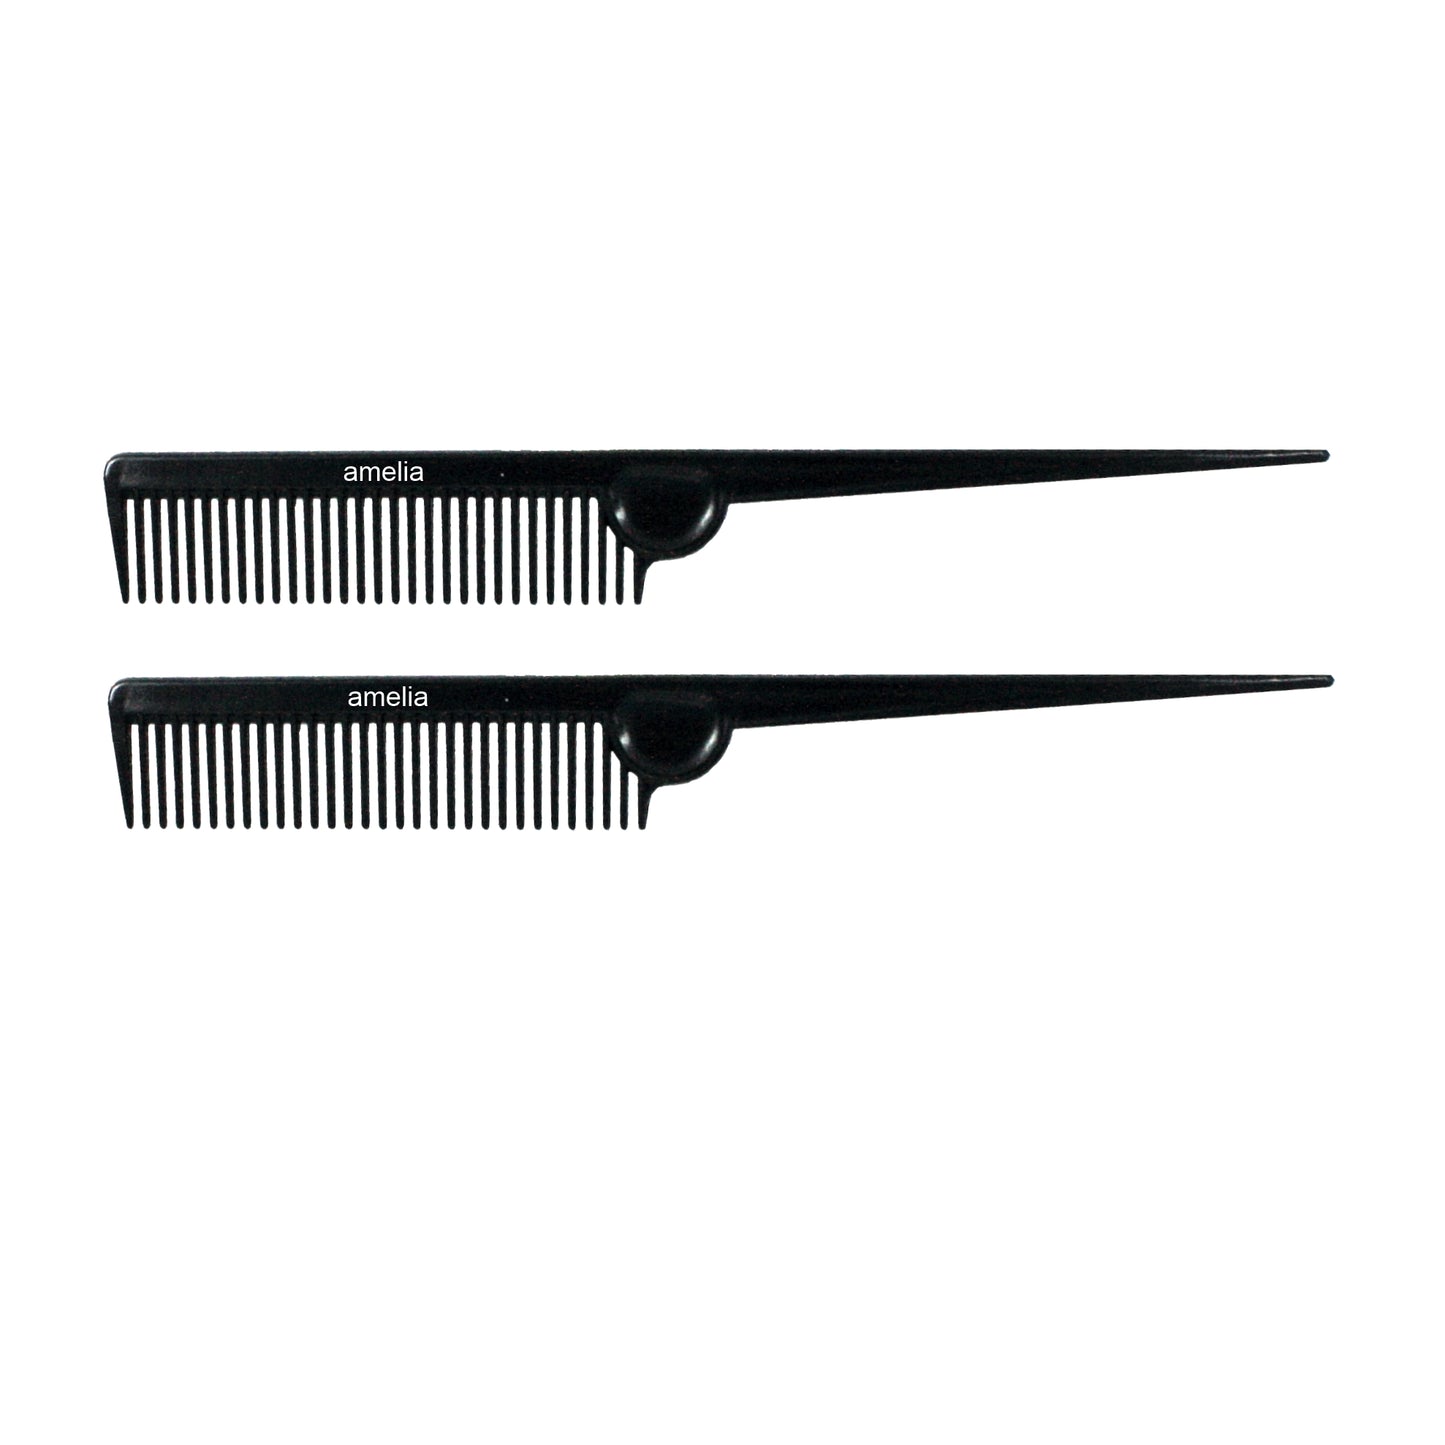 Amelia Beauty, 8.5in Black Plastic Pin Rat Tail Standard Tooth Comb, Made in USA, Professional Grade Hair Comb, Highlighting, Sectioning & Styling Hair with Long Tail Tip, Wet or Dry, 8.5"x1", 2 Pack